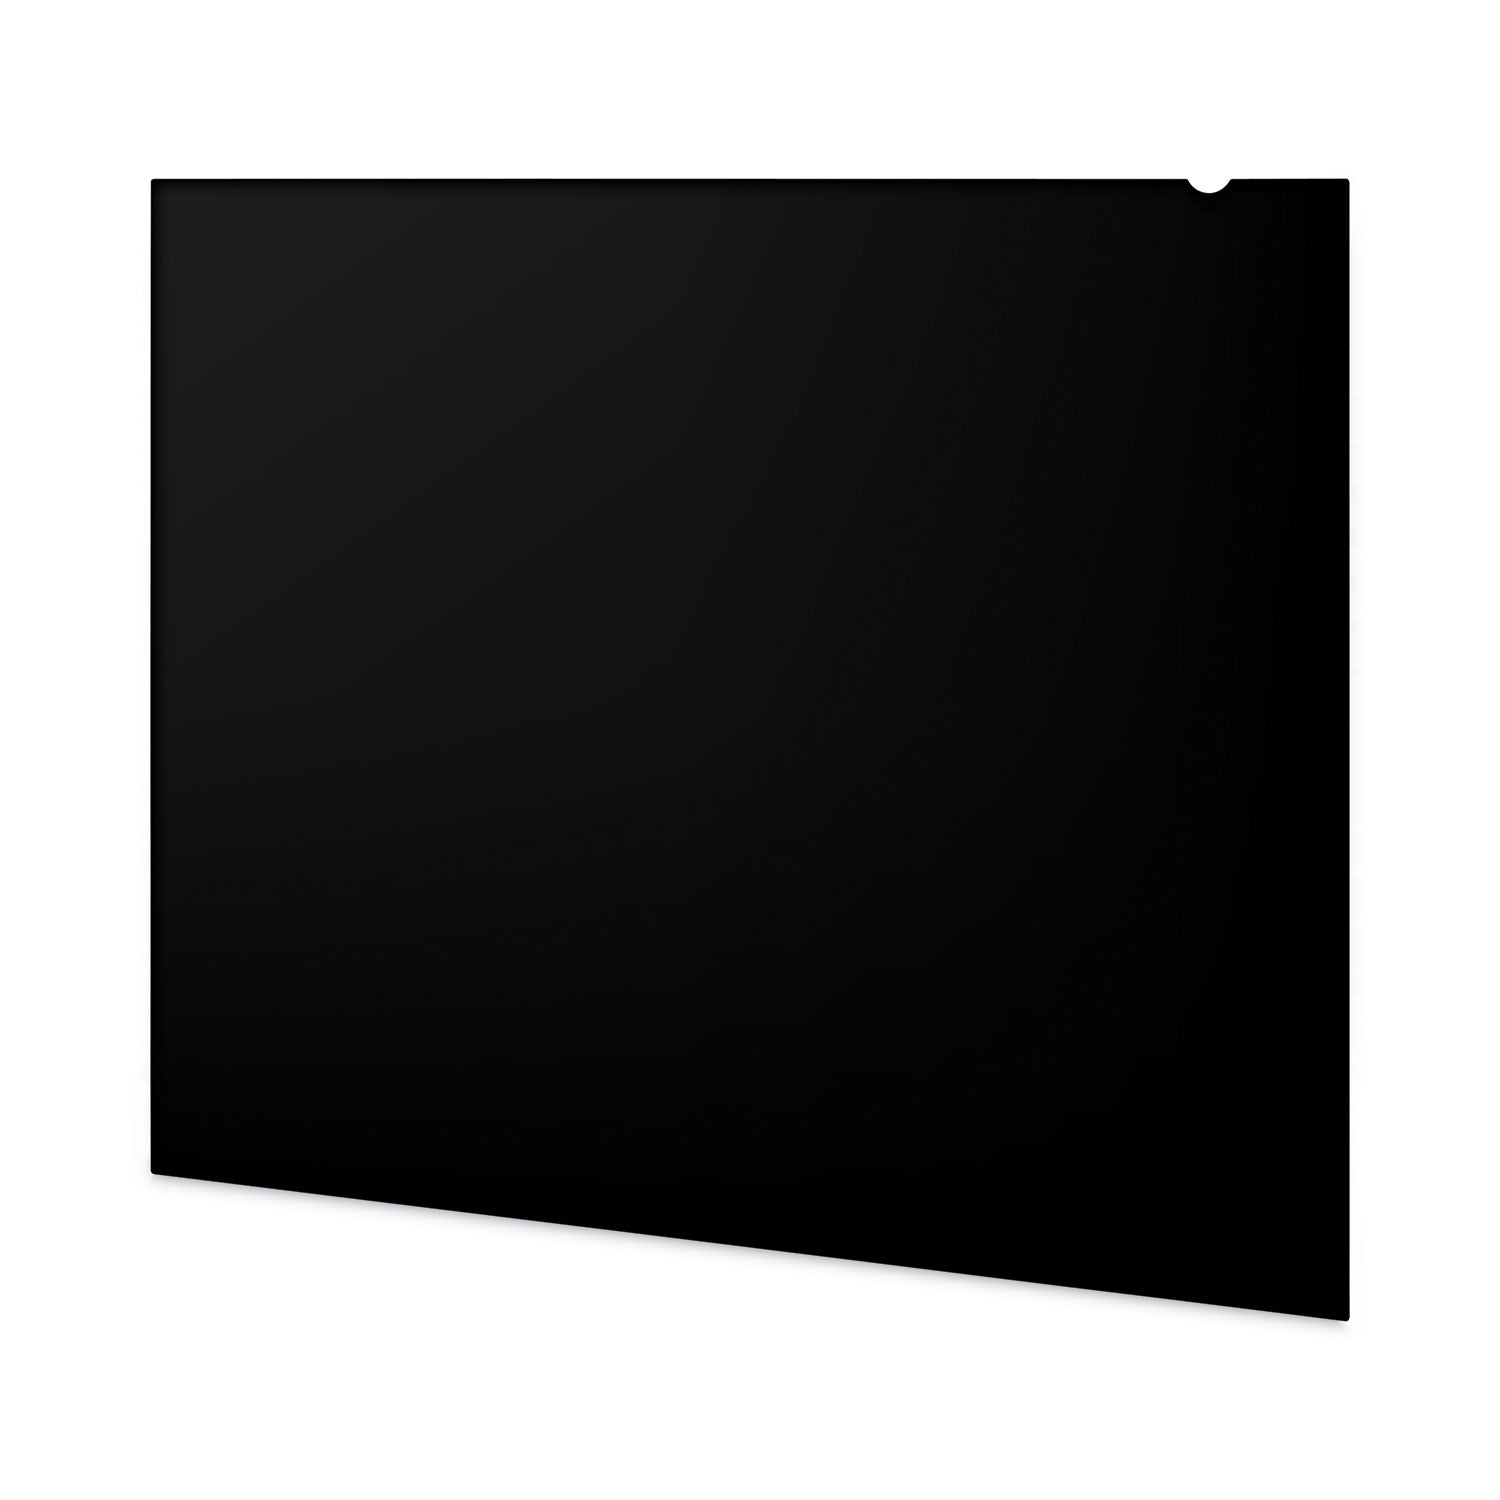 blackout-privacy-filter-for-30-widescreen-flat-panel-monitor-1610-aspect-ratio_ivrblf30w - 1